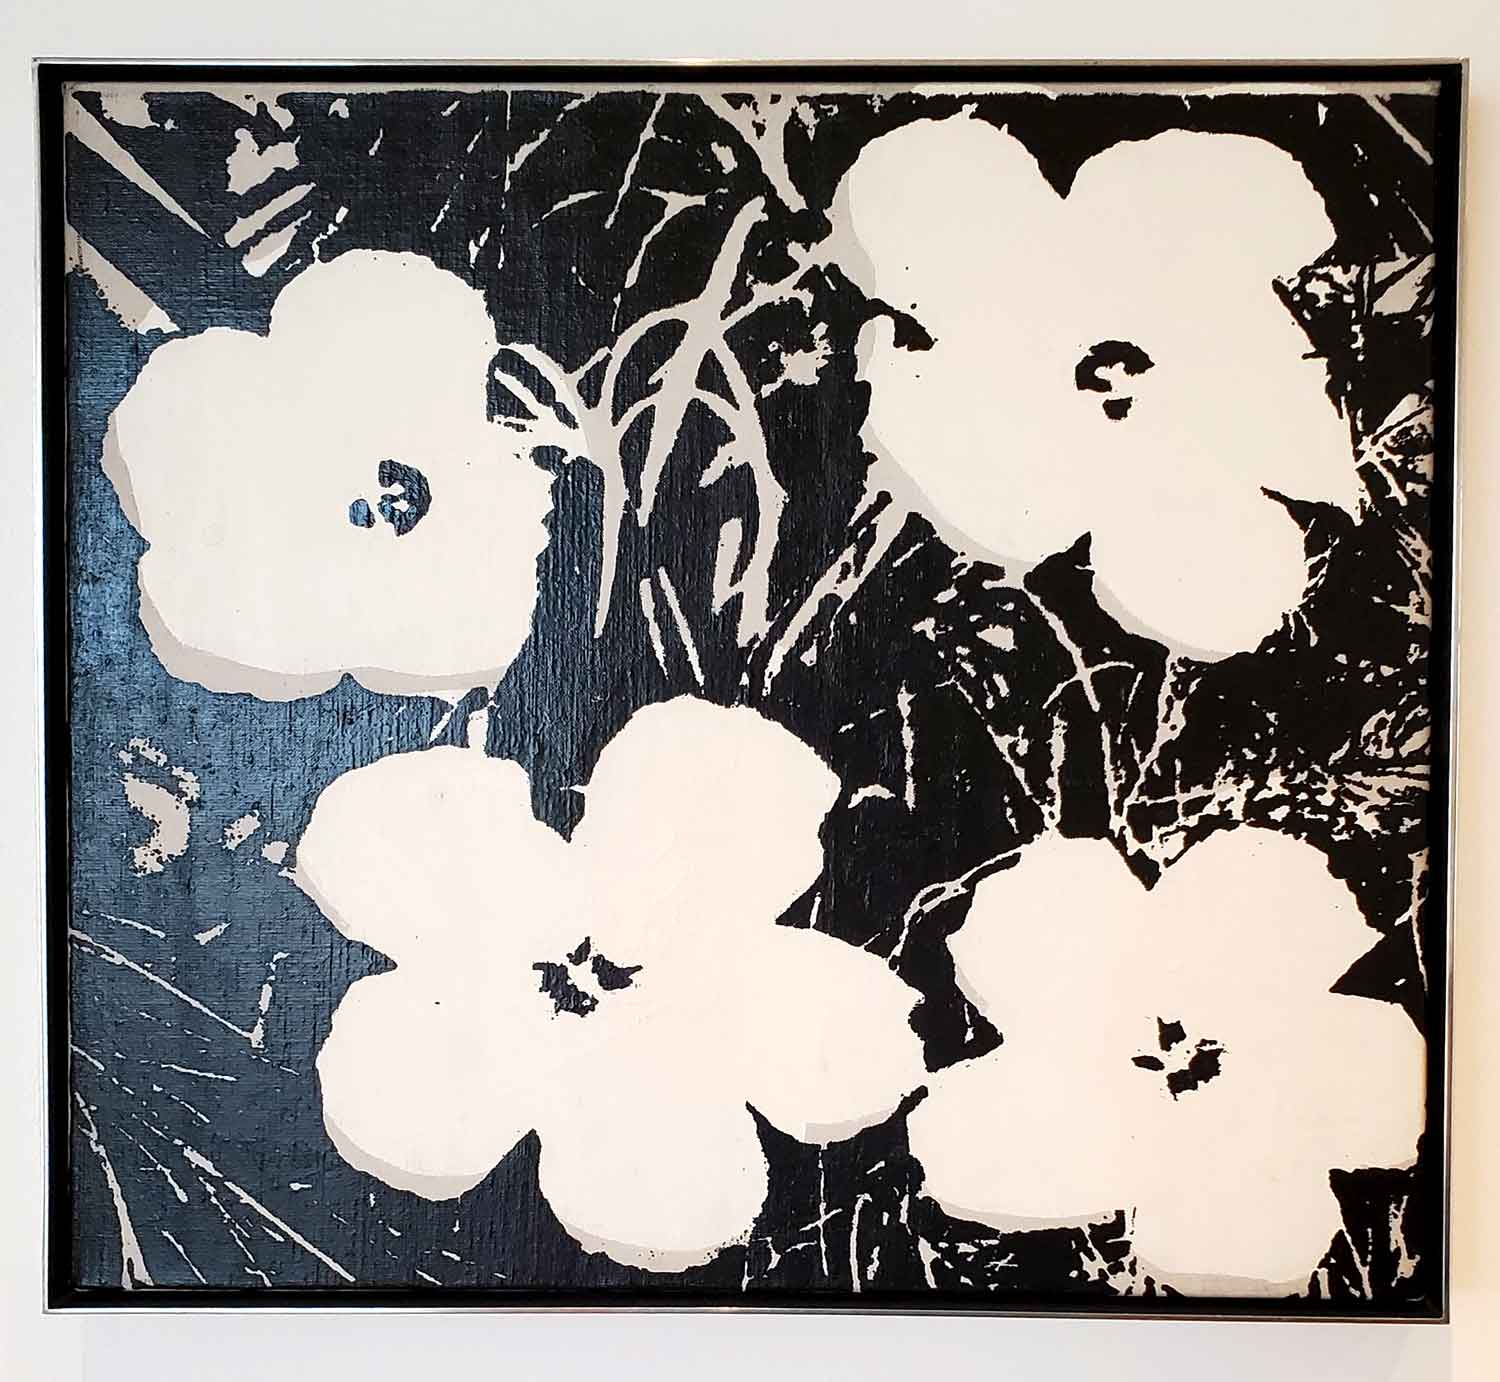 Flowers (Black and White) by Andy Warhol at the Des Moines Art Center.